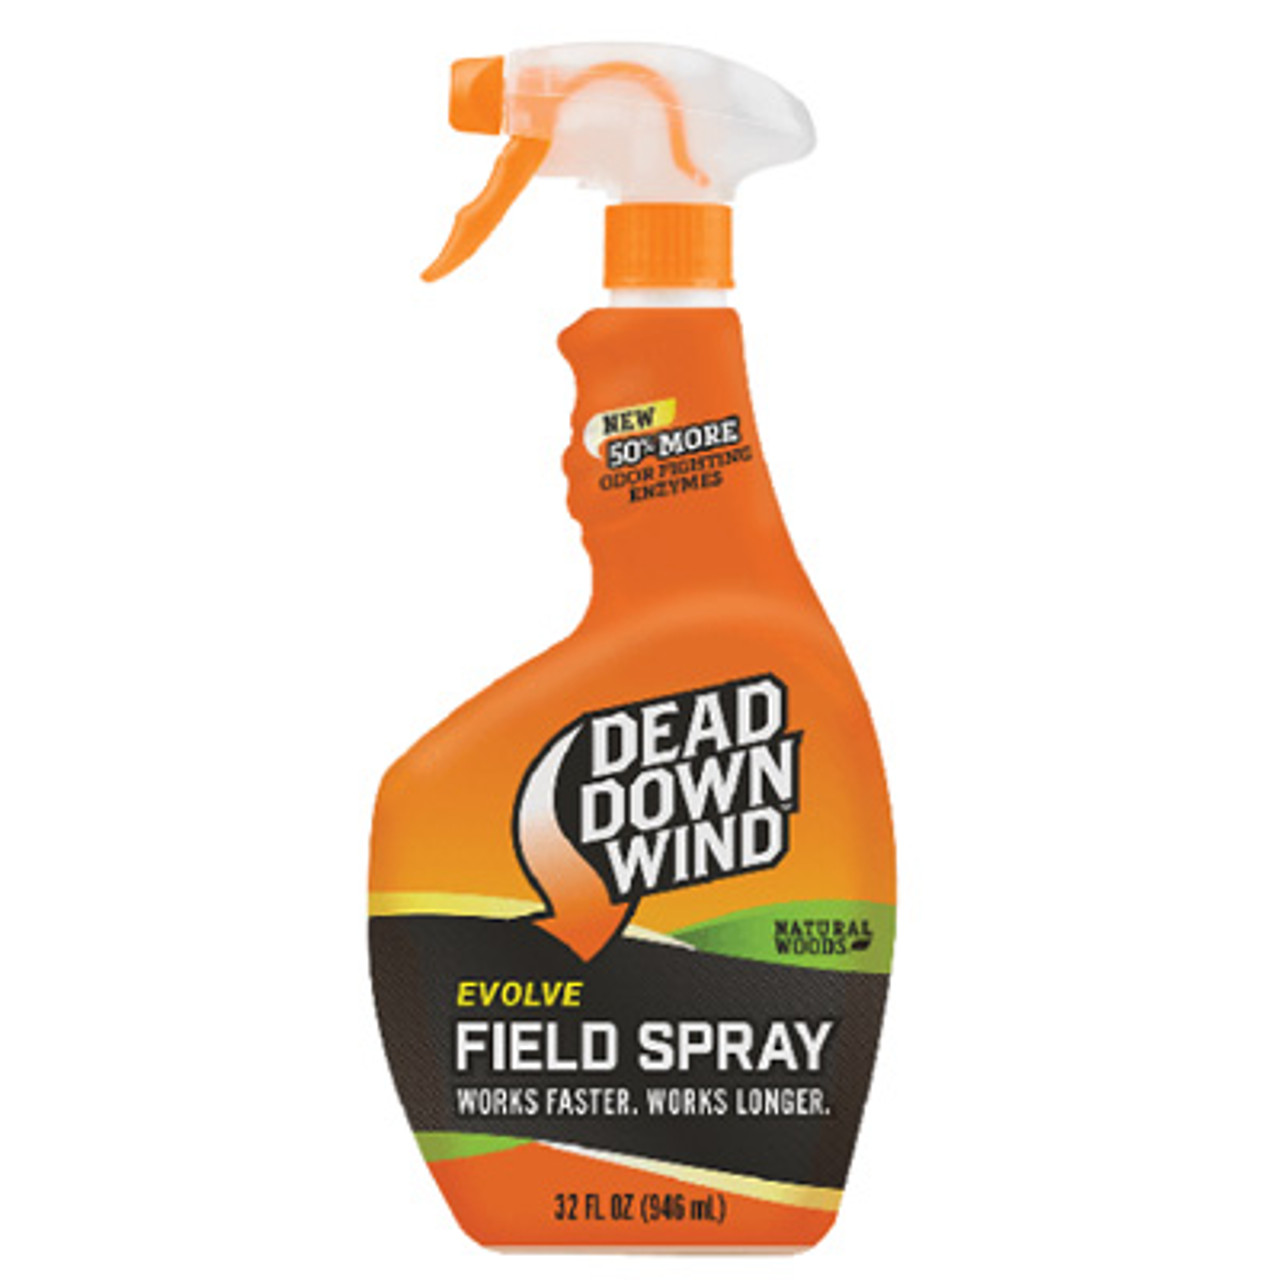 Natural Woods Field Spray 32 oz by Dead Down Wind